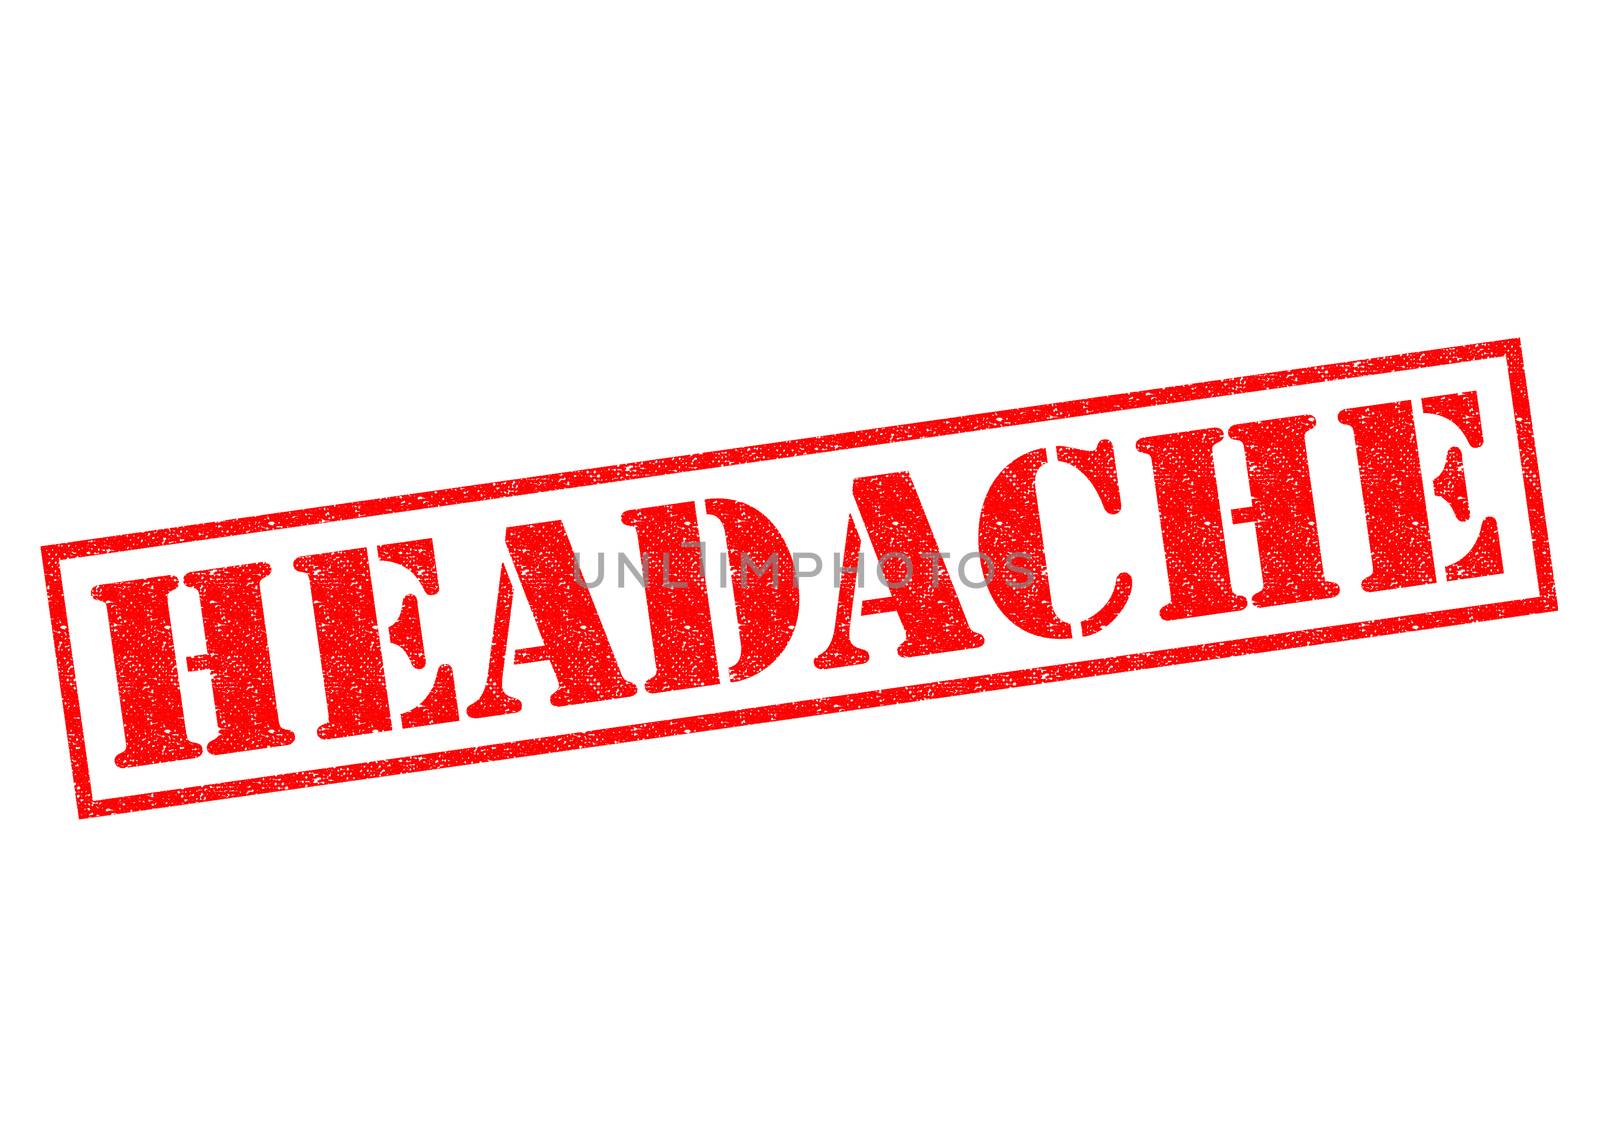 HEADACHE red Rubber Stamp over a white background.